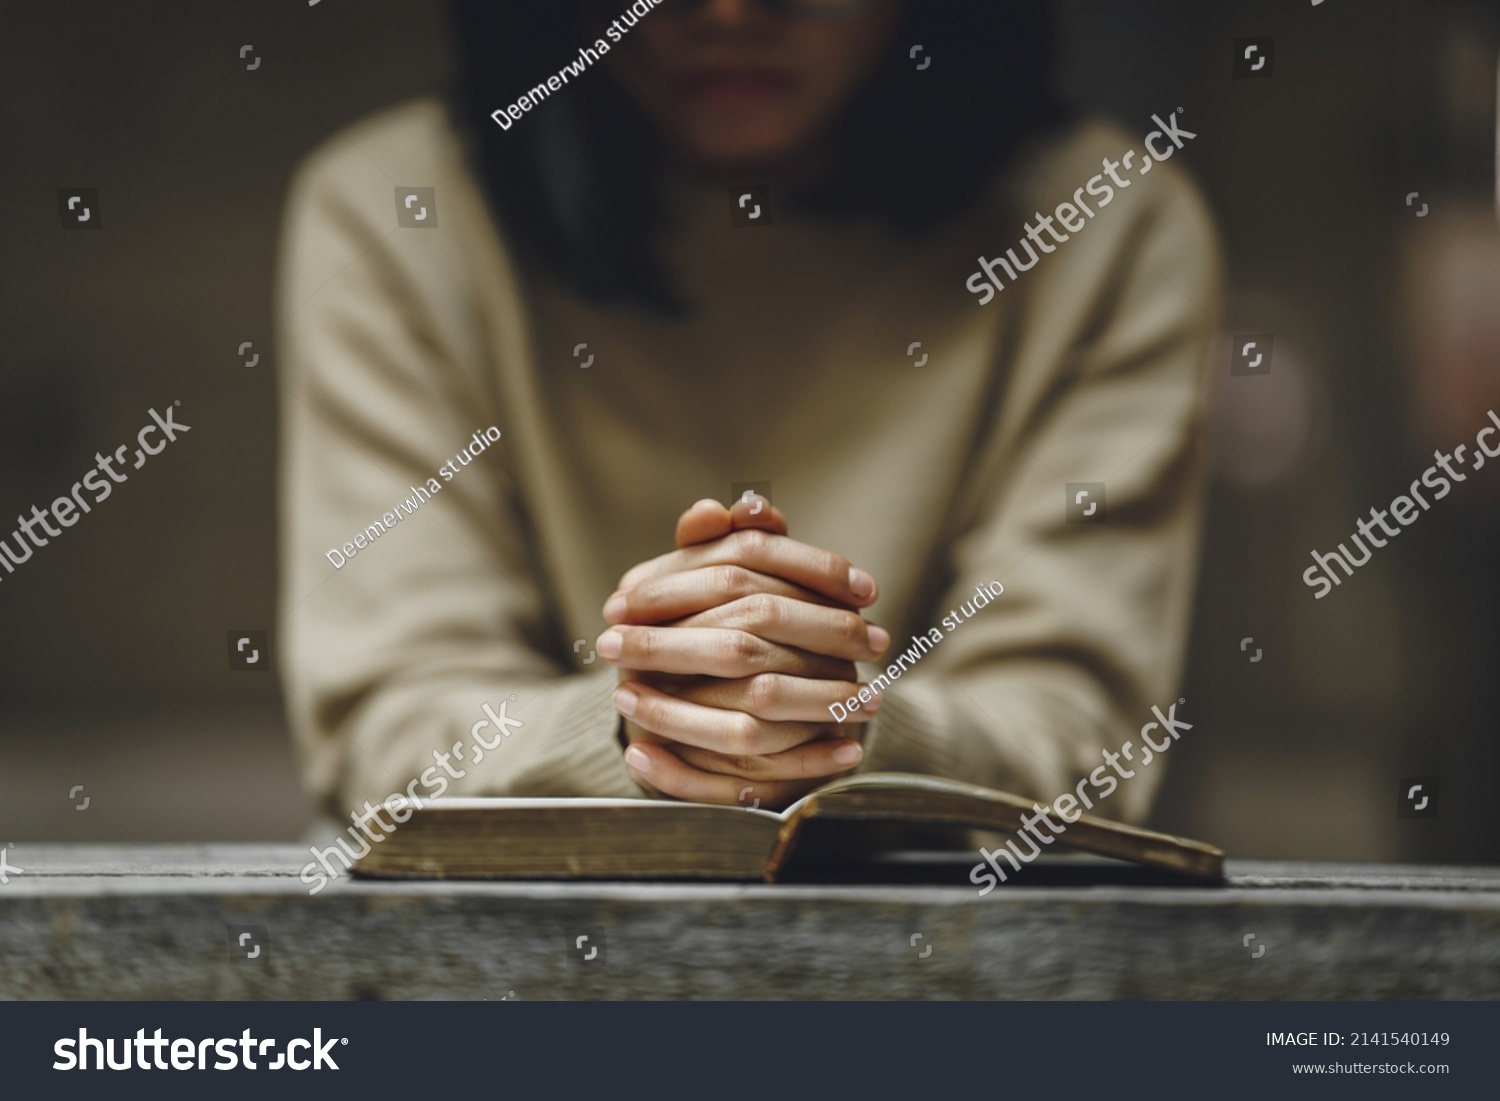 Christian life crisis prayer to god. Woman holding hands pray for god blessing to wishing have a better life on a wooden table. Woman hands praying to god with the bible. believe in goodness. #2141540149